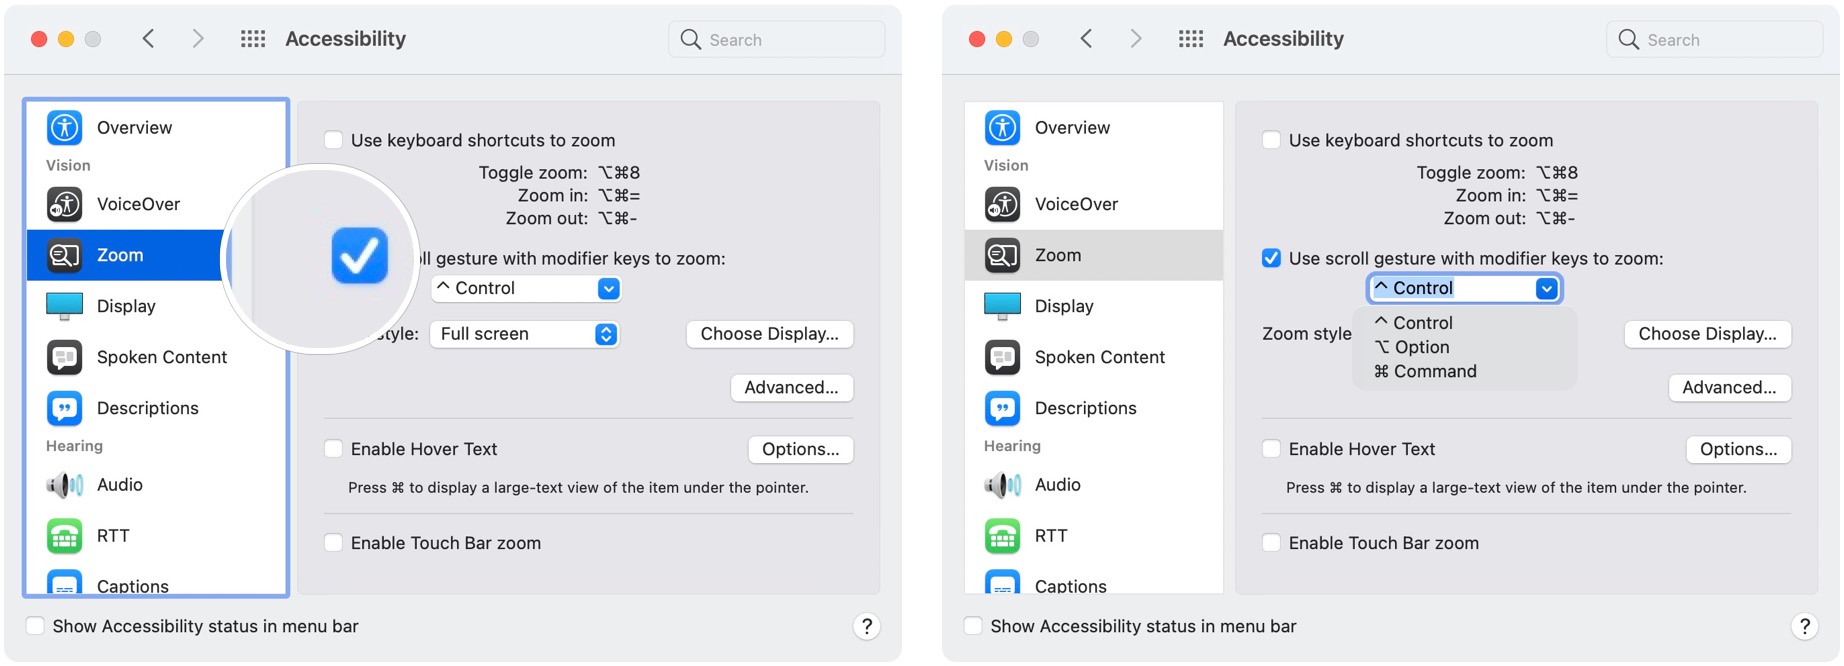 To enable shortcuts for Accessibility zoom, click the checkbox next to Use scroll gesture with modifier keys to zoom, then choose one of the options from the drop-down. 